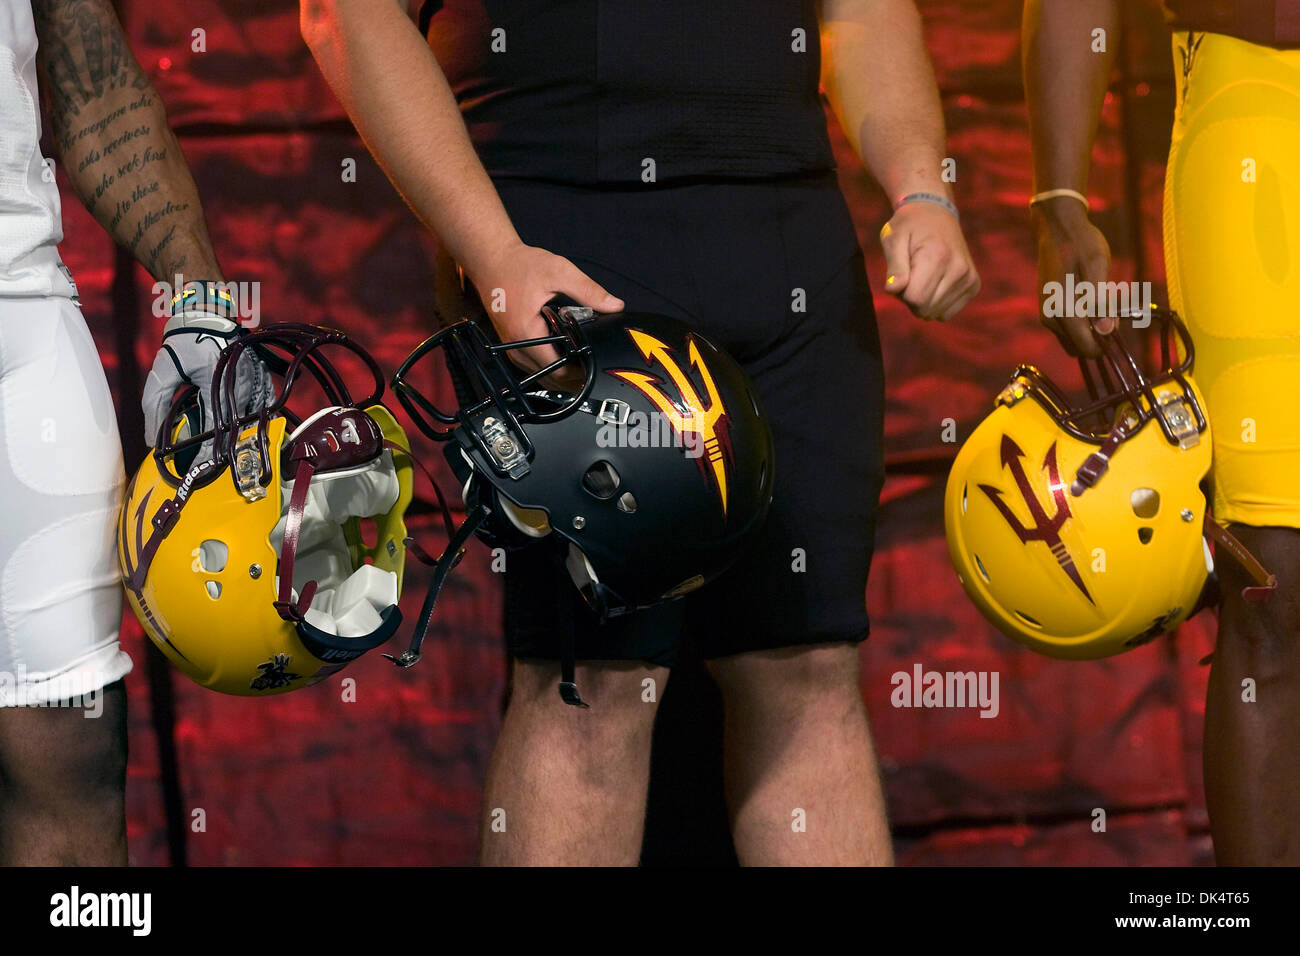 Apr. 12, 2011 - Tempe, Arizona, U.S - Arizona State University unveils a new look for the athletic program with a new logo on the helmet during a public launch at the Memorial Union on the ASU campus in Tempe, Arizona. (Credit Image: © Gene Lower/Southcreek Global/ZUMAPRESS.com) Stock Photo